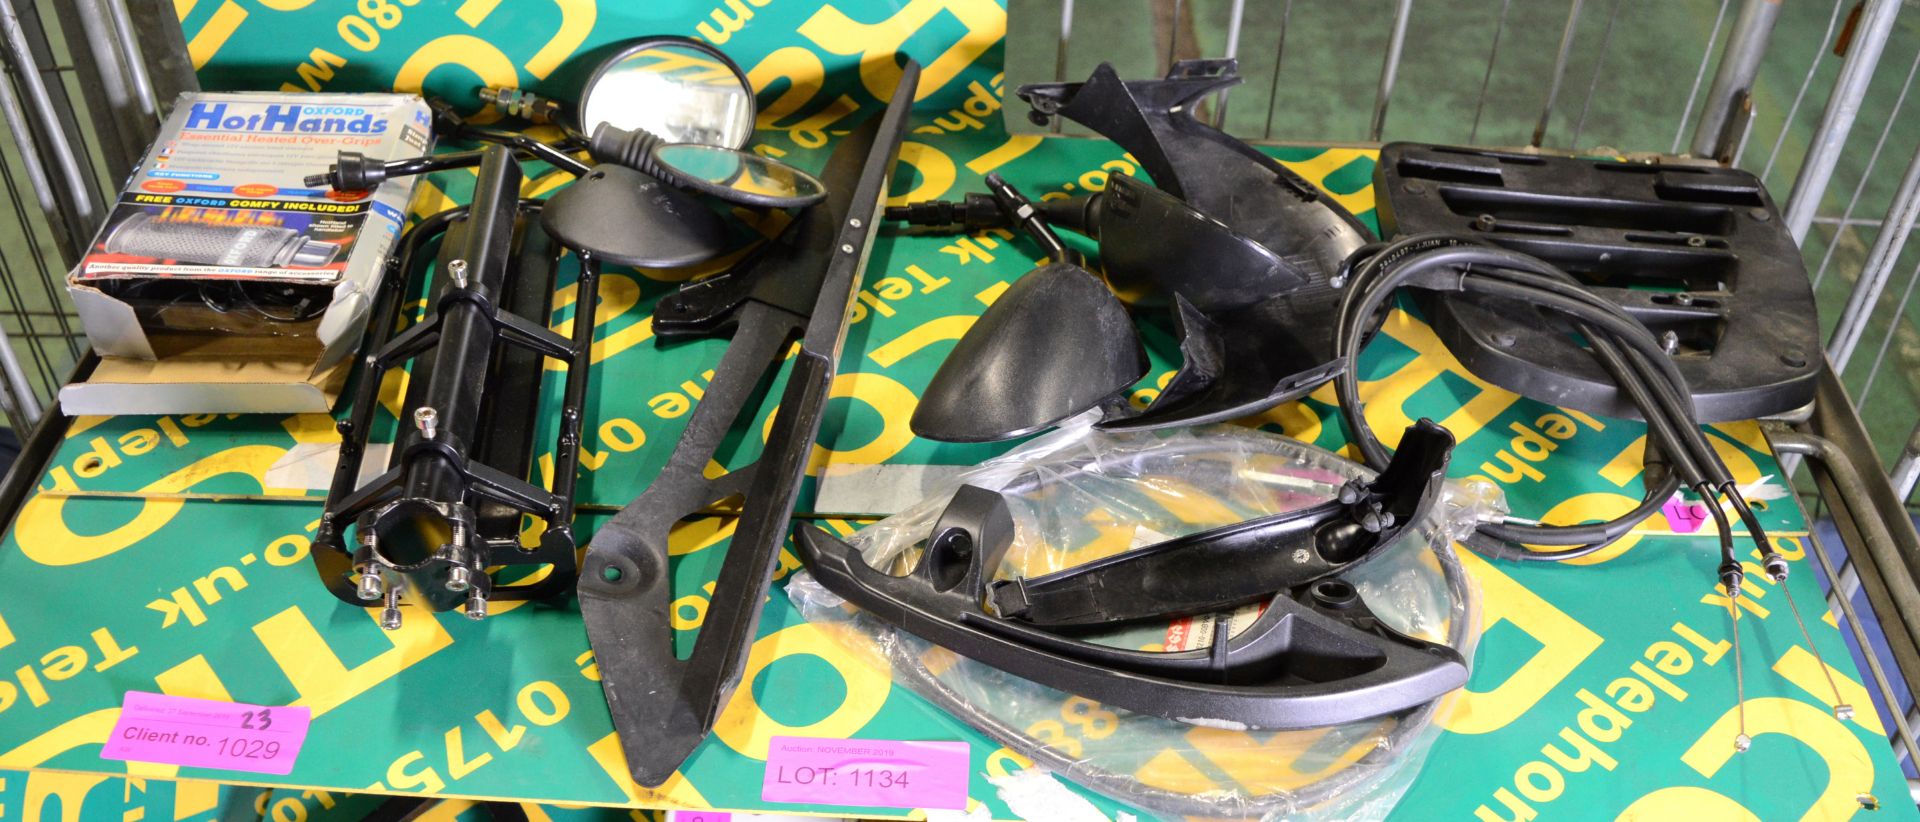 Motorcycle Parts - Heated Grips, 2 sets Mirrors, Chain Guard, Honda Hornet, Triumph Sprint